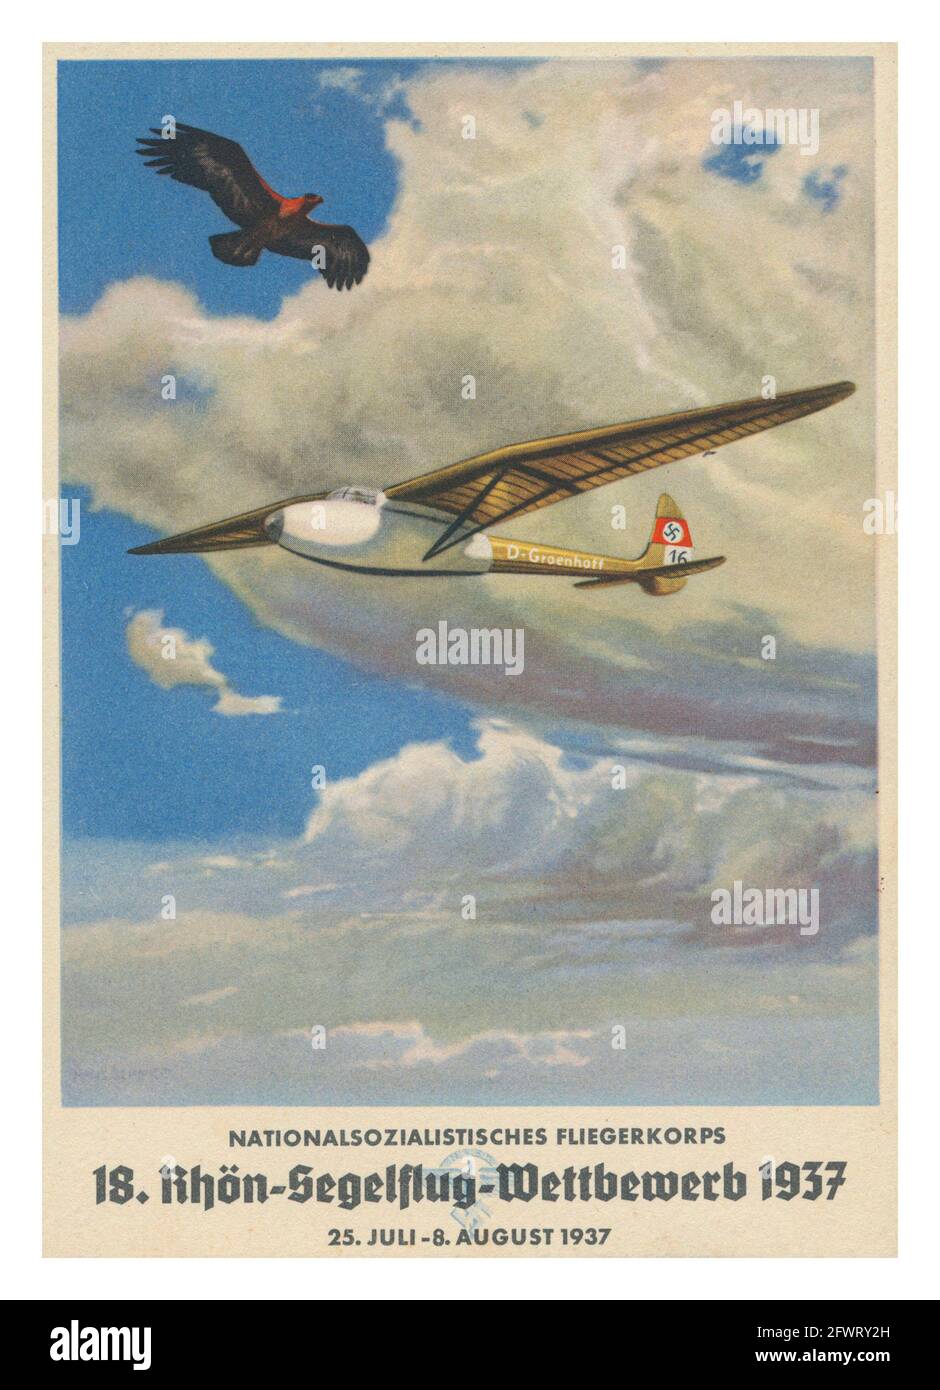 FLIEGERKORPS 1937,Nazi Propaganda Card Poster  'National Socialist Fliegerkorps NSFK 18th Rhön-Segelflug-Competition 1937', illustration of the glider 'D-Groenhoff' with Nazi Swastika and eagle in the sky, preparation and training for the Nazi Germany Luftwaffe WW2 Stock Photo